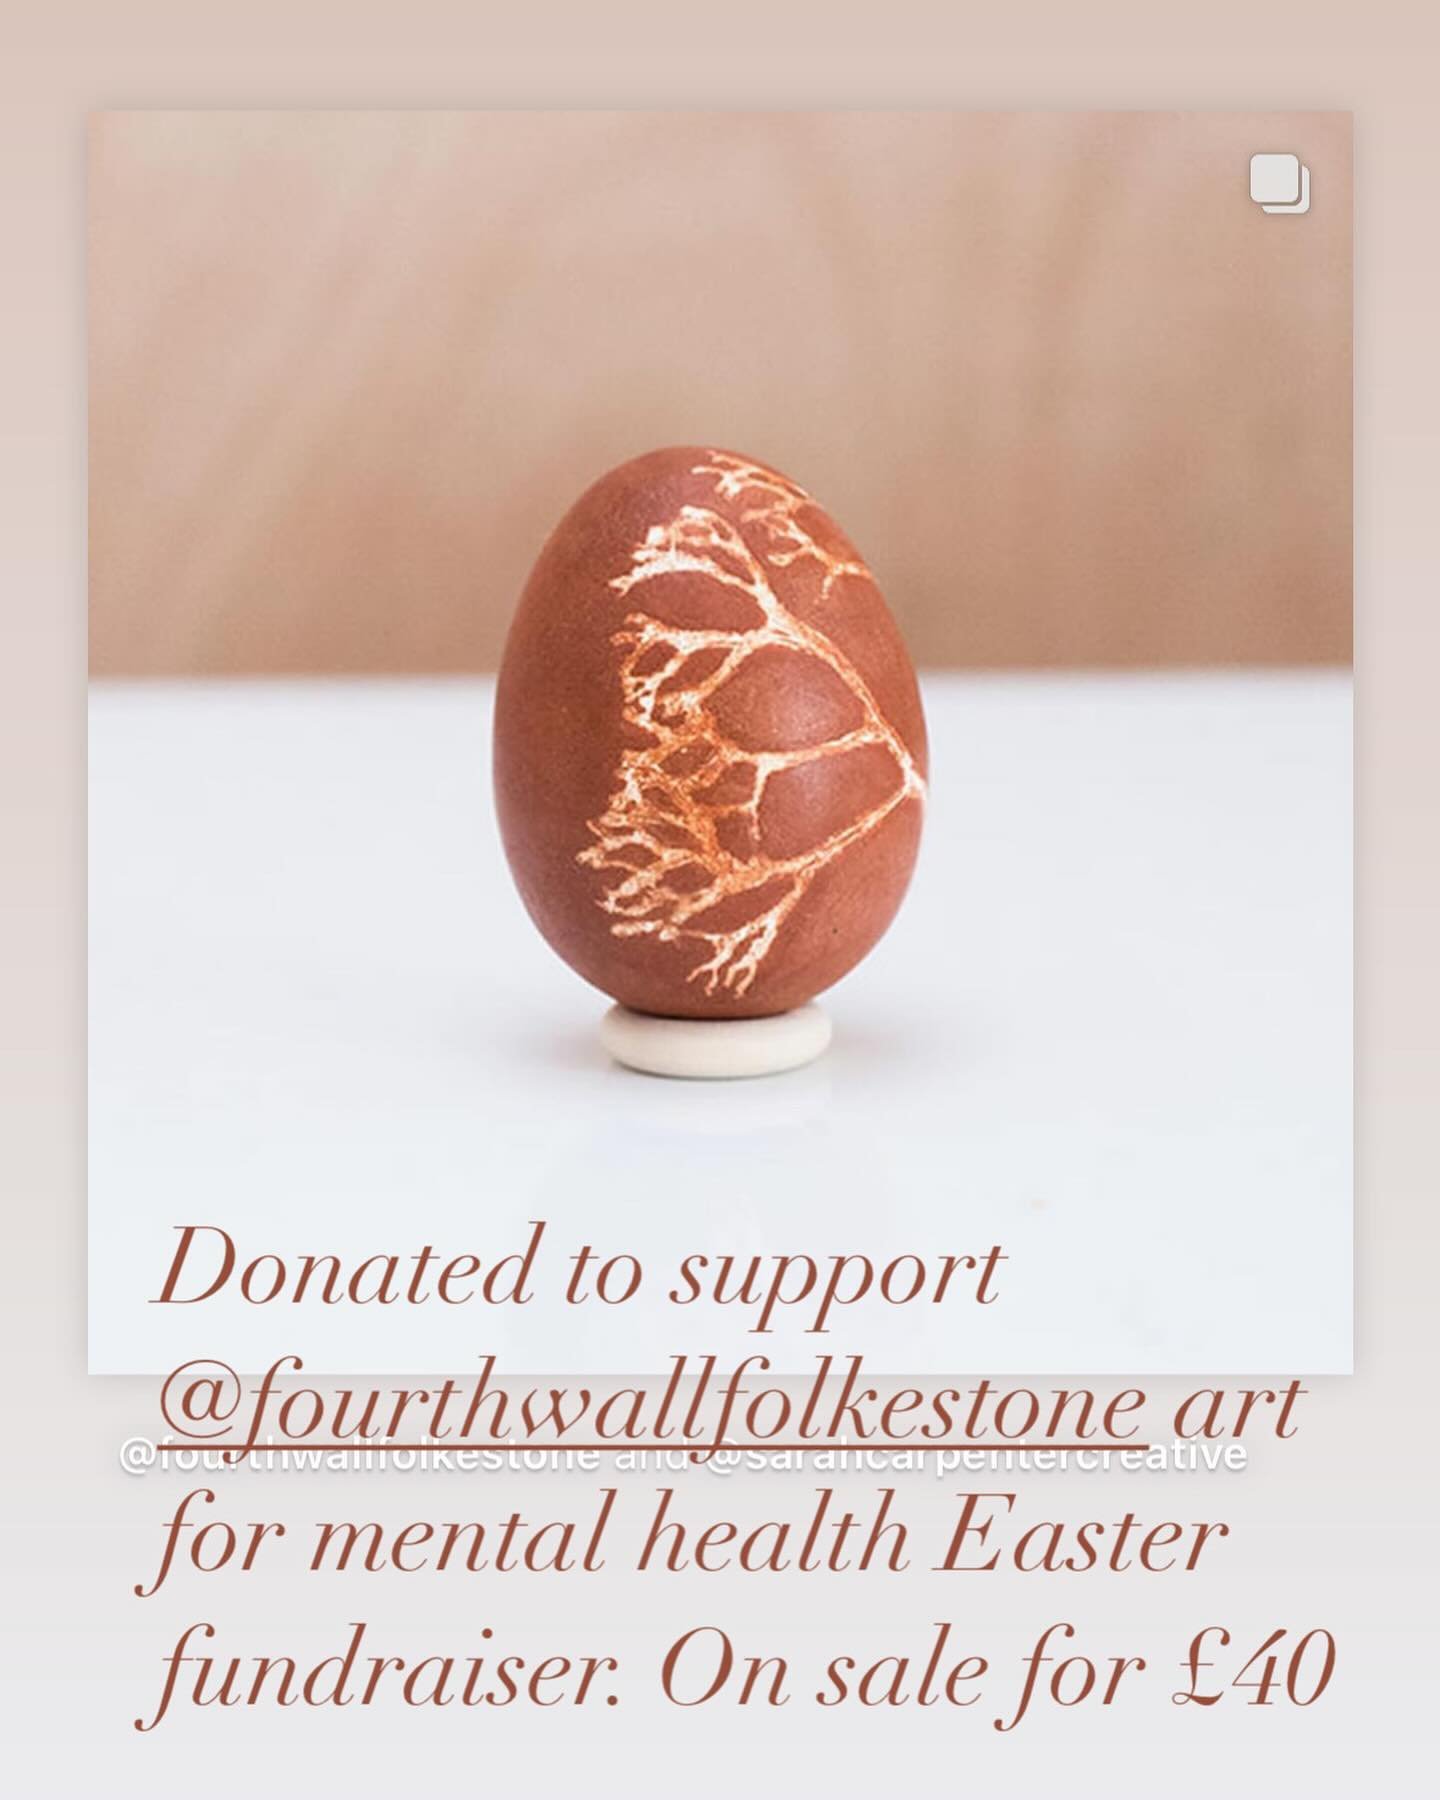 Take a look at @fourthwallfolkestone&rsquo;s collection of artist decorated ceramic eggs on sale to fundraise. 

My egg is painted with earth pigment from Hunstanton cliffs in Norfolk, mixed with egg tempera medium.